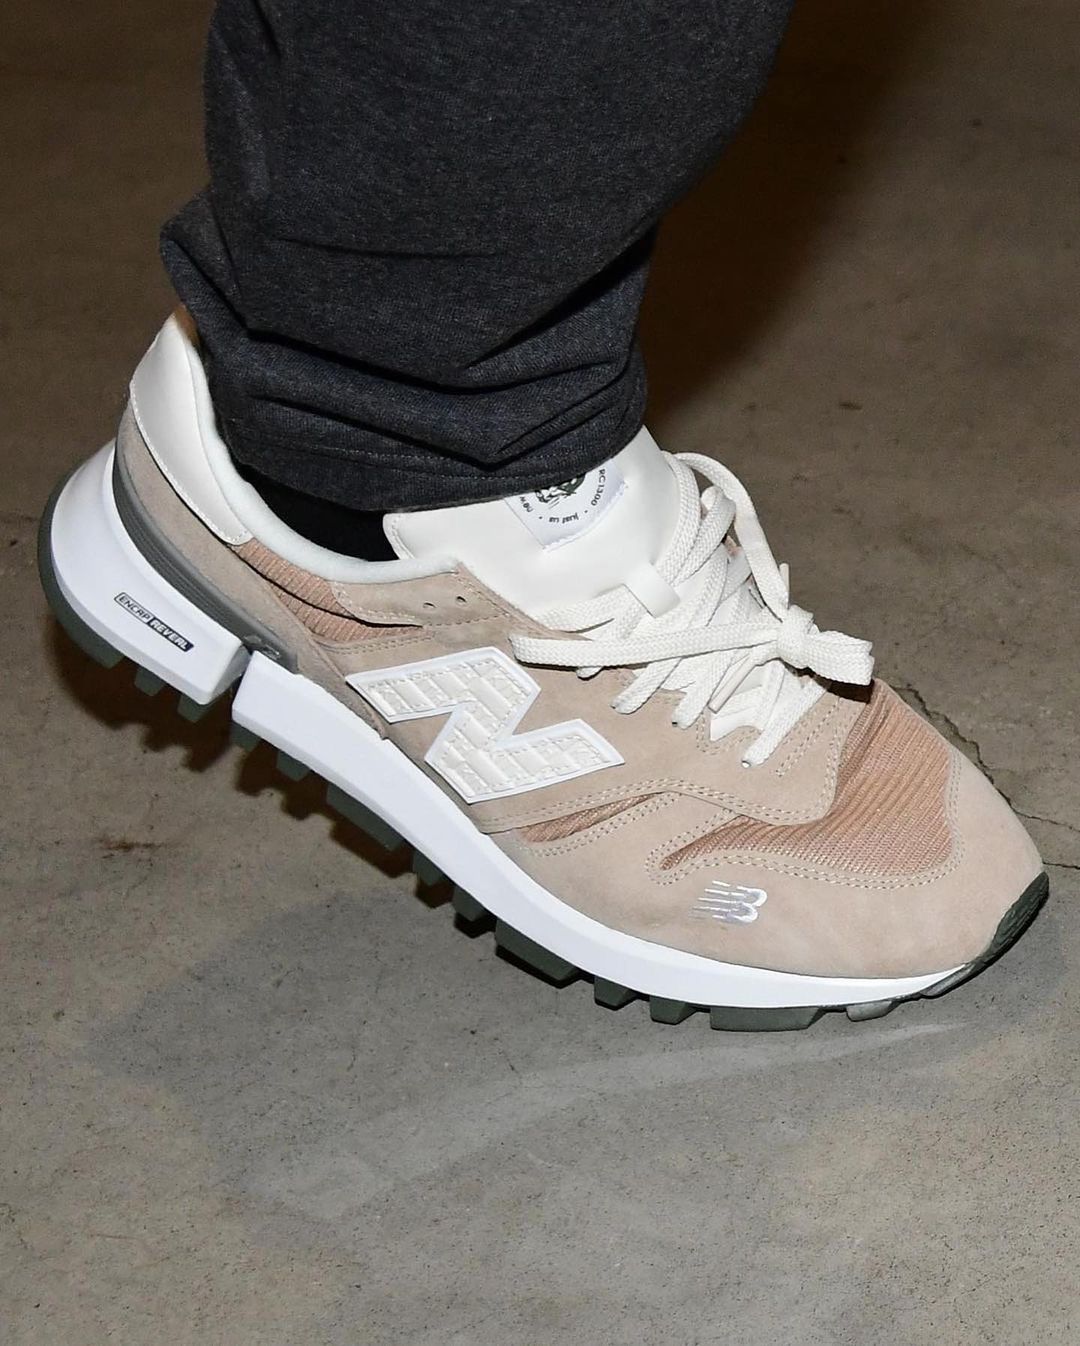 Kith x New Balance RC1300 Revealed in Multiple Colorways